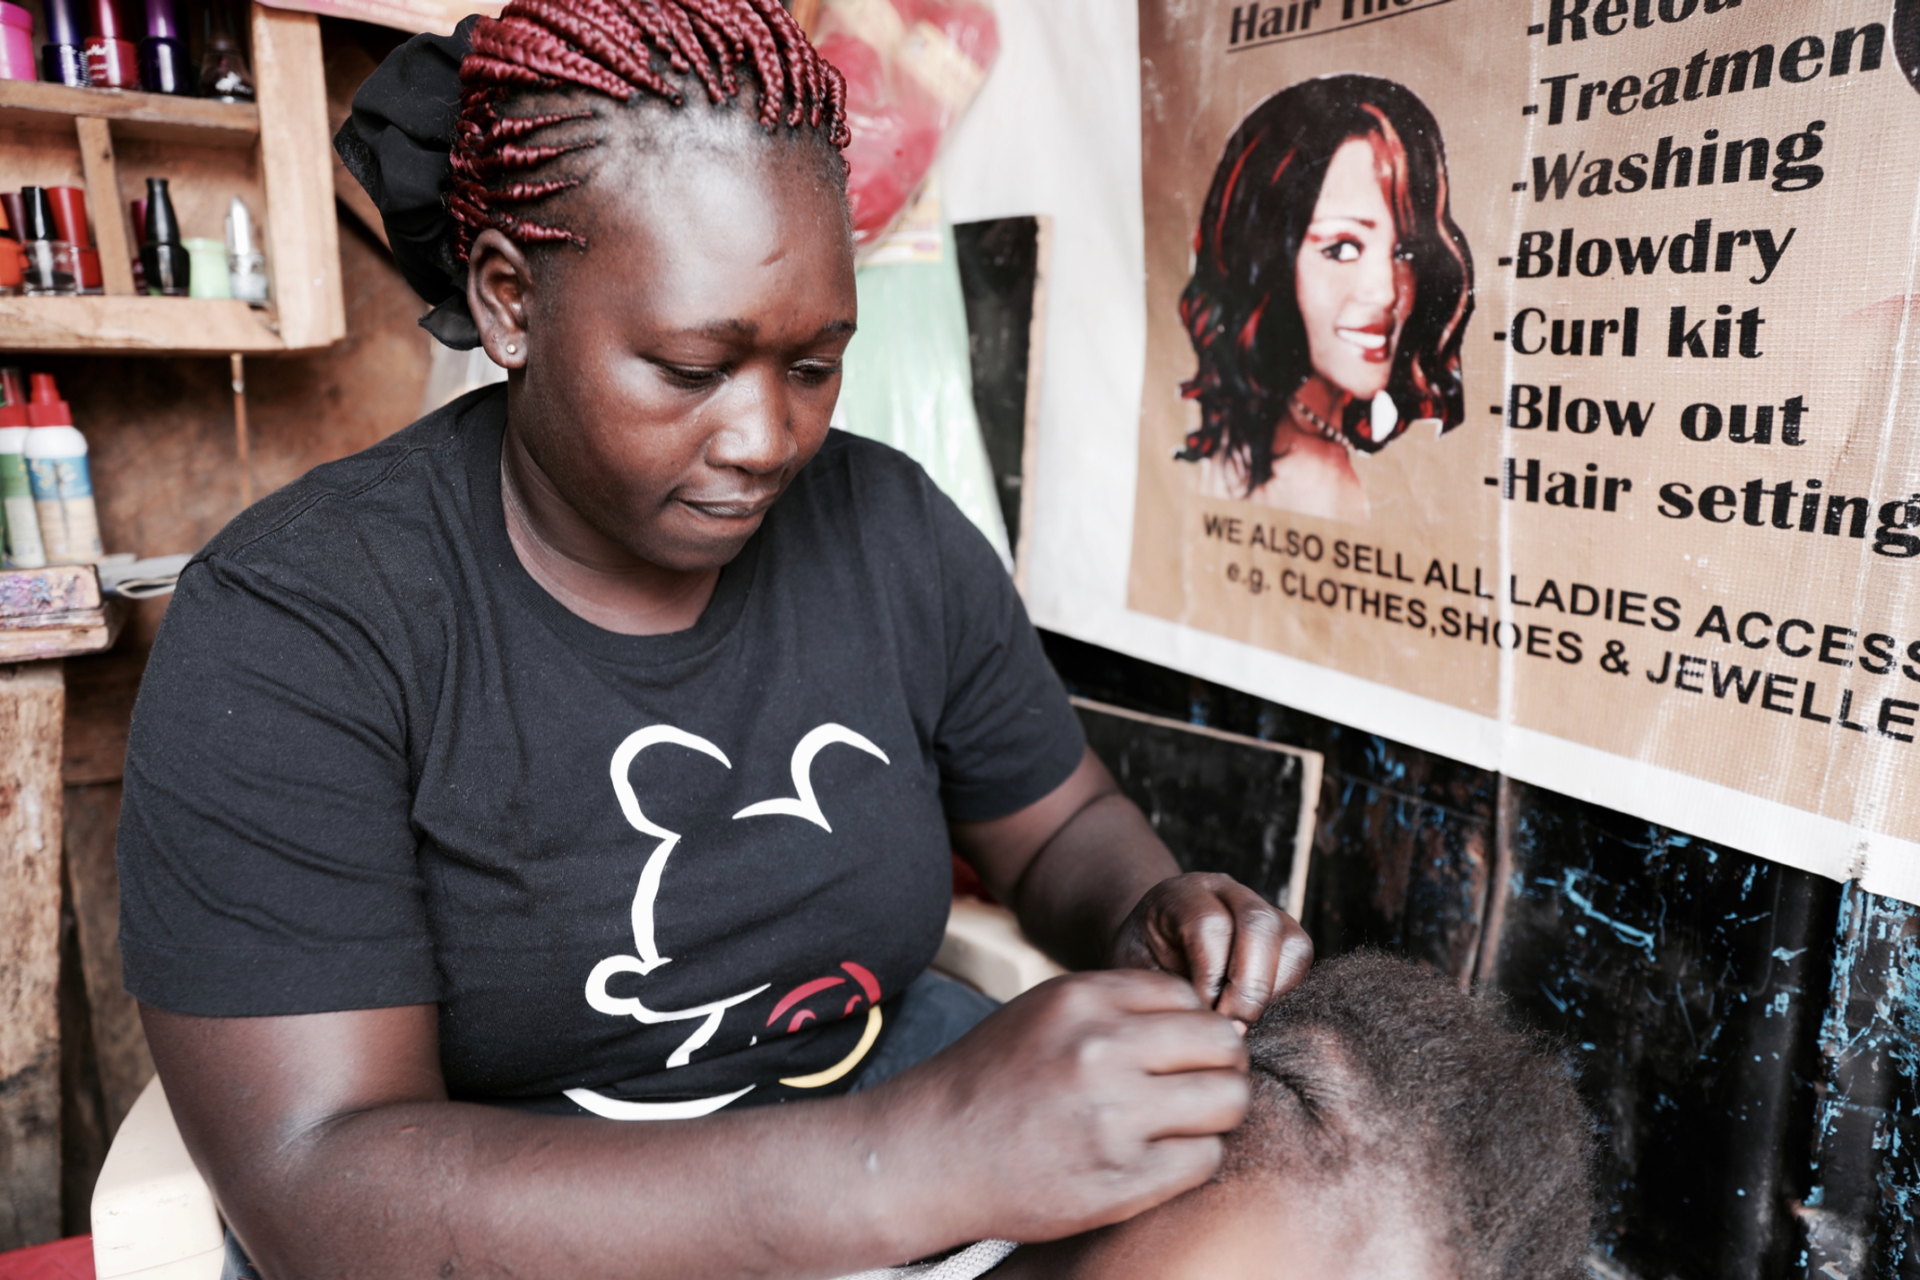 Everlyne, a thirty-five year old mother of three, combs out her daughter’s braids her beauty salon.